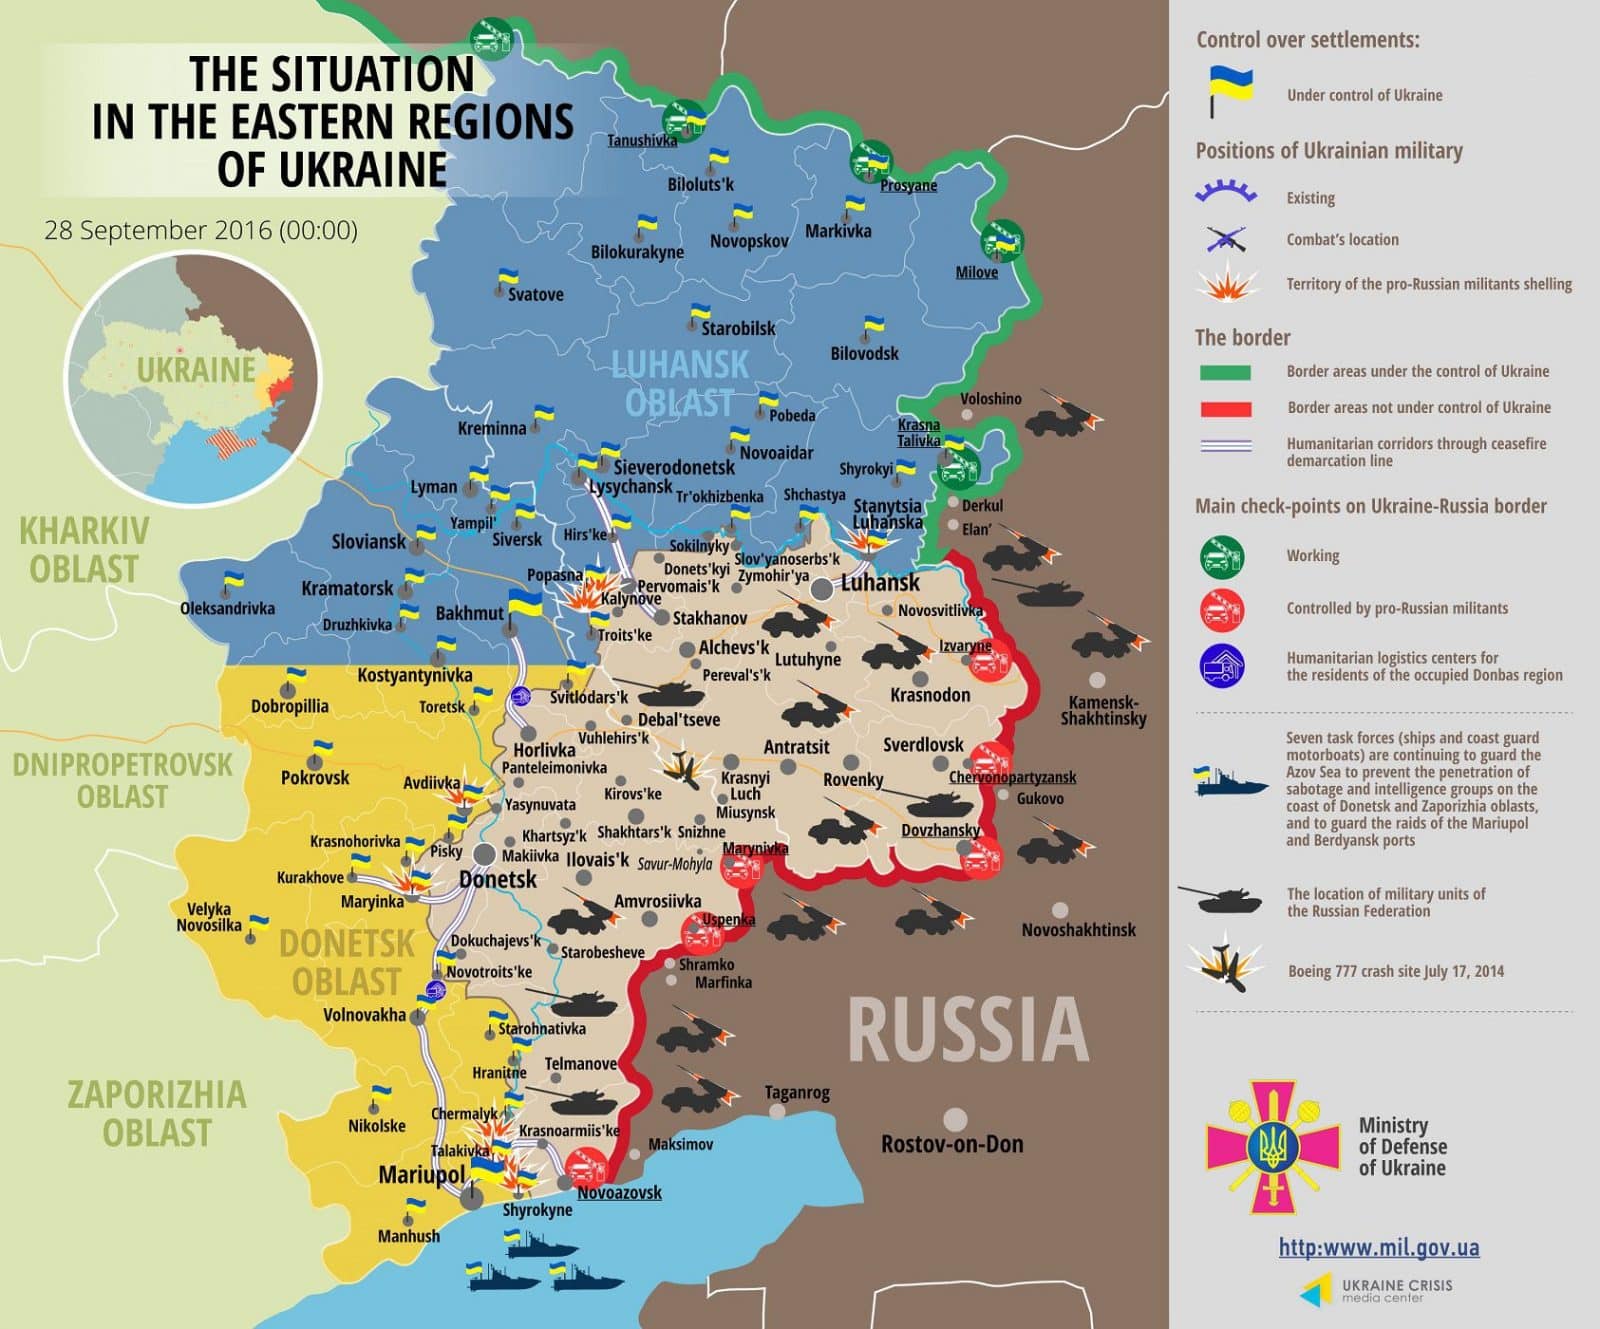 ”Ceasefire” in Donbas: Russian proxies attack Ukraine 35 times in last day